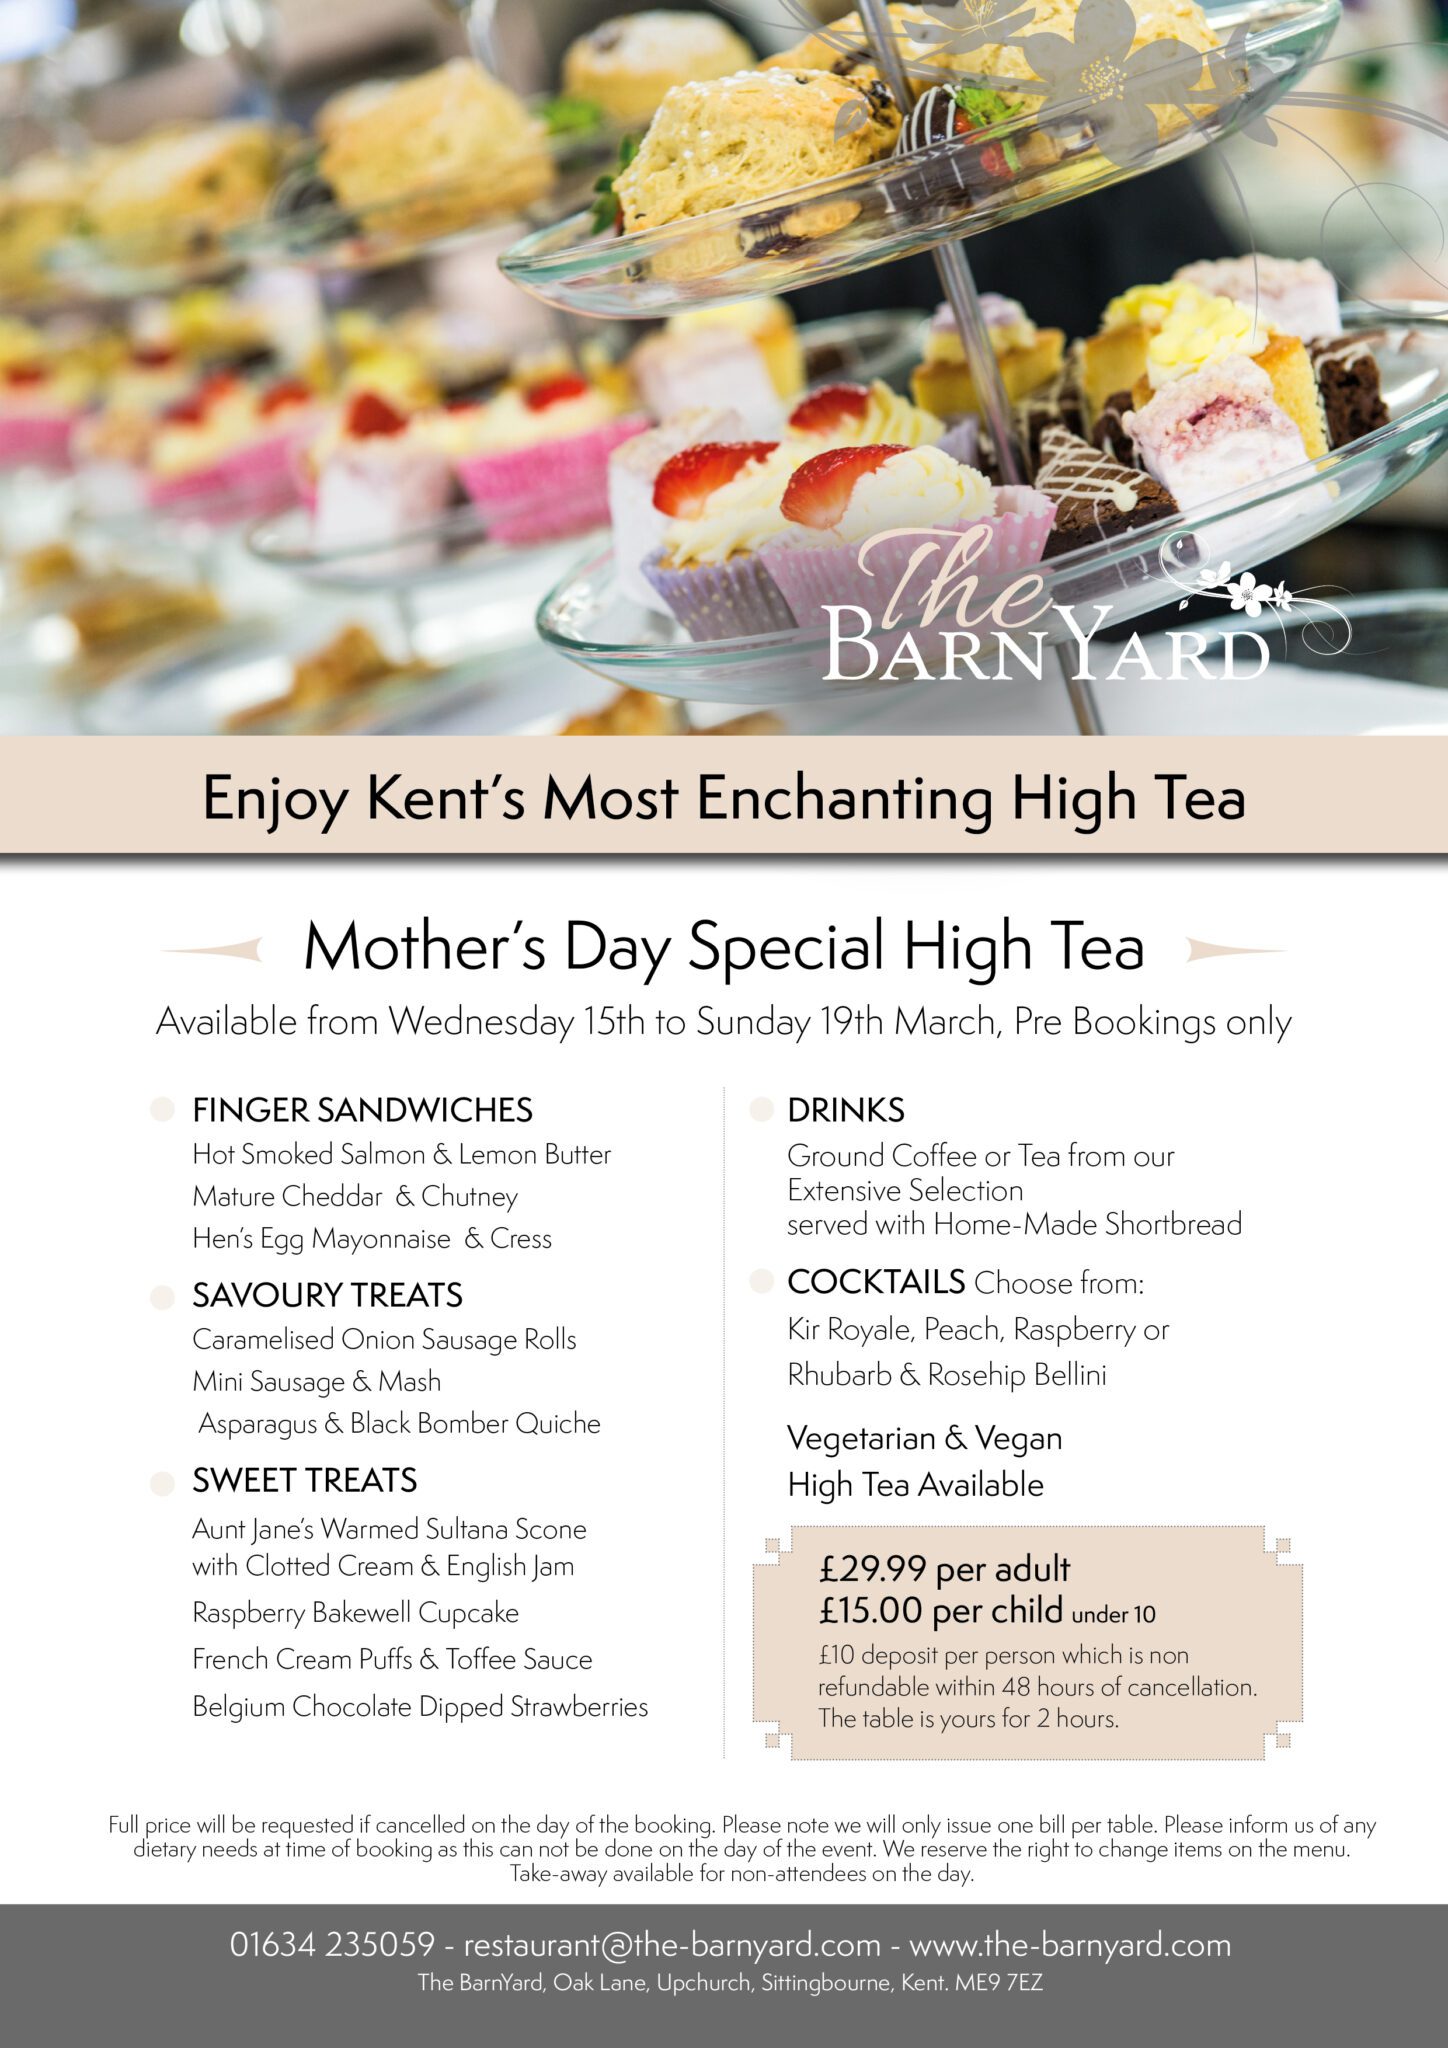 Mother’s Day Menus 2023